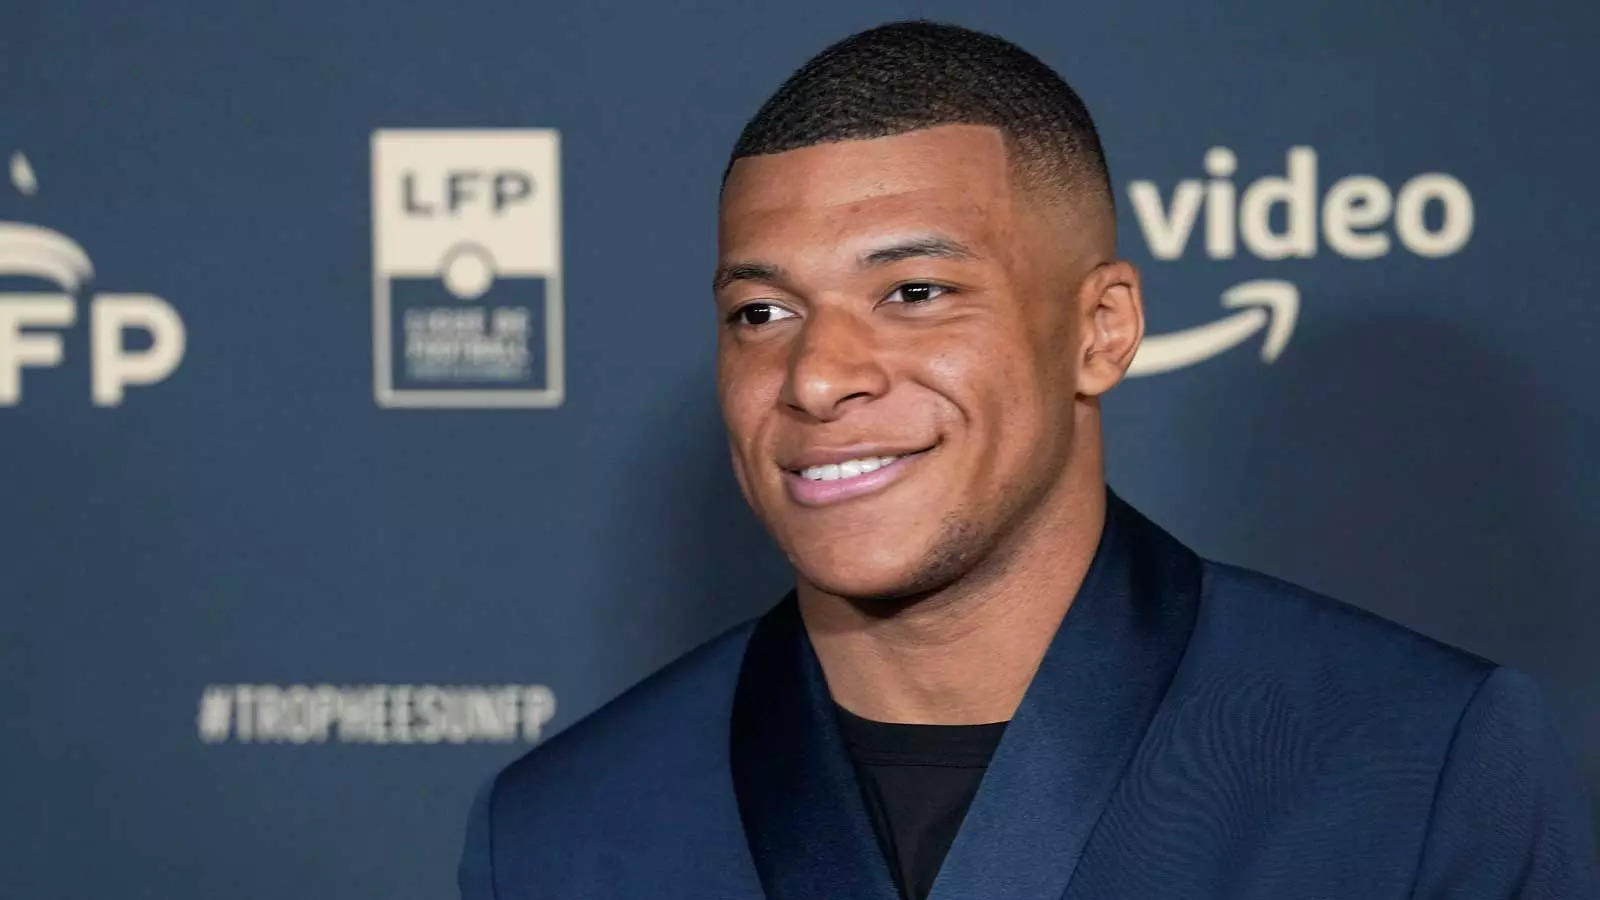 Kylian Mbappe is all set to announce if he will PSG for Real Madrid or not